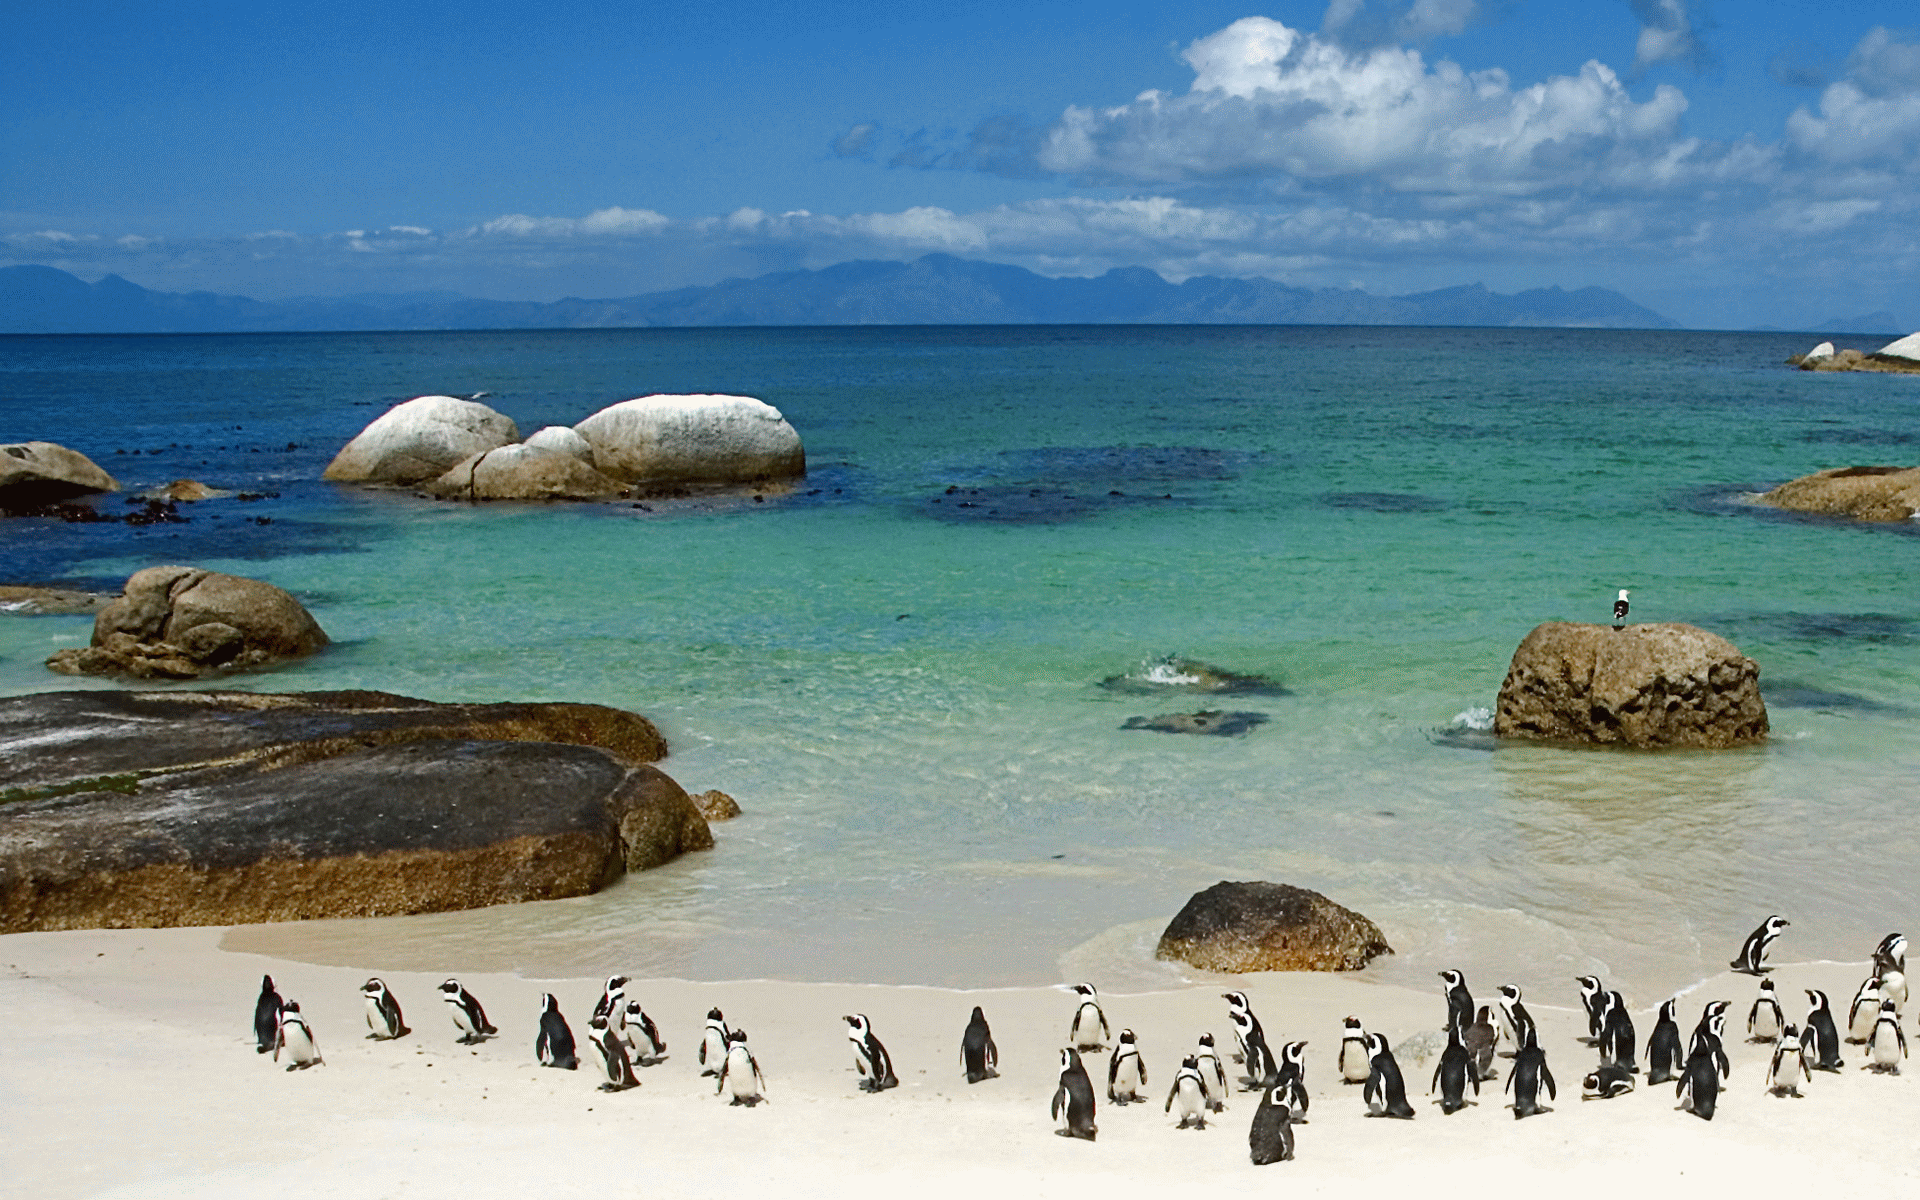 Penguins on beach in Cape Town